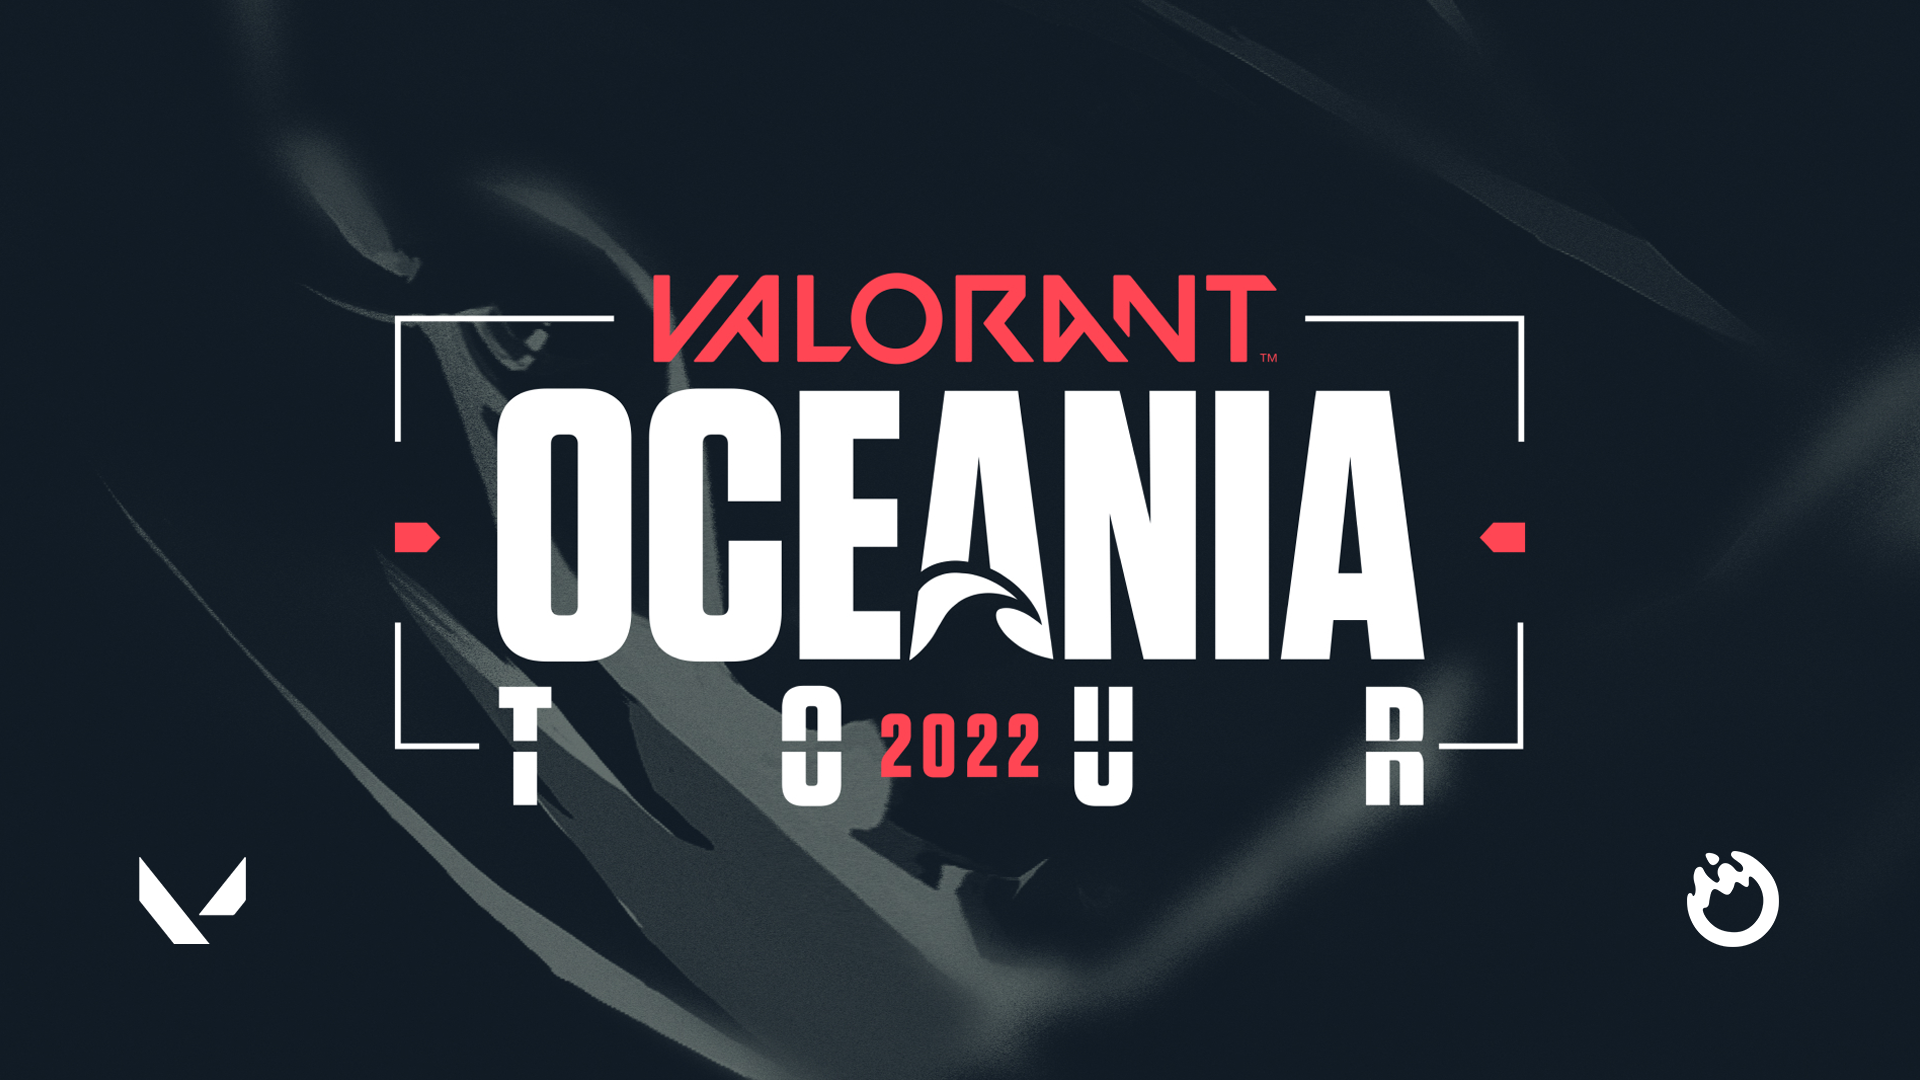 LPL announces Valorant Oceania Tour 2022 with APAC pathway to Masters events